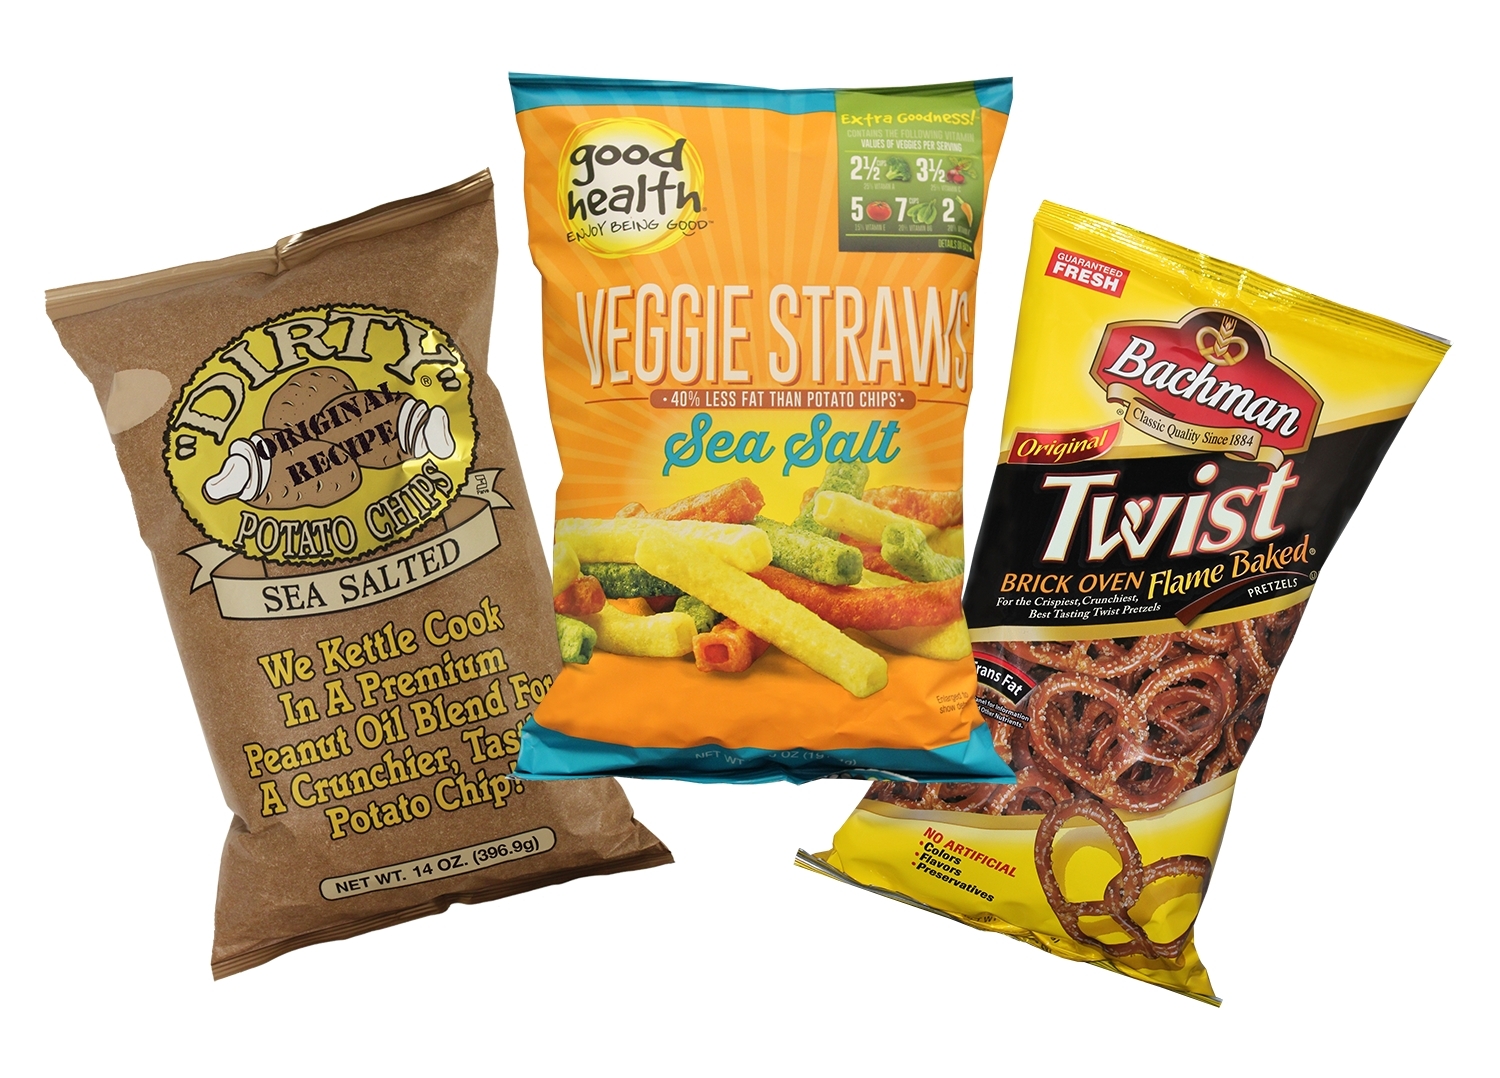 Utz Specialty Division launched to offer Better-for-You Snack